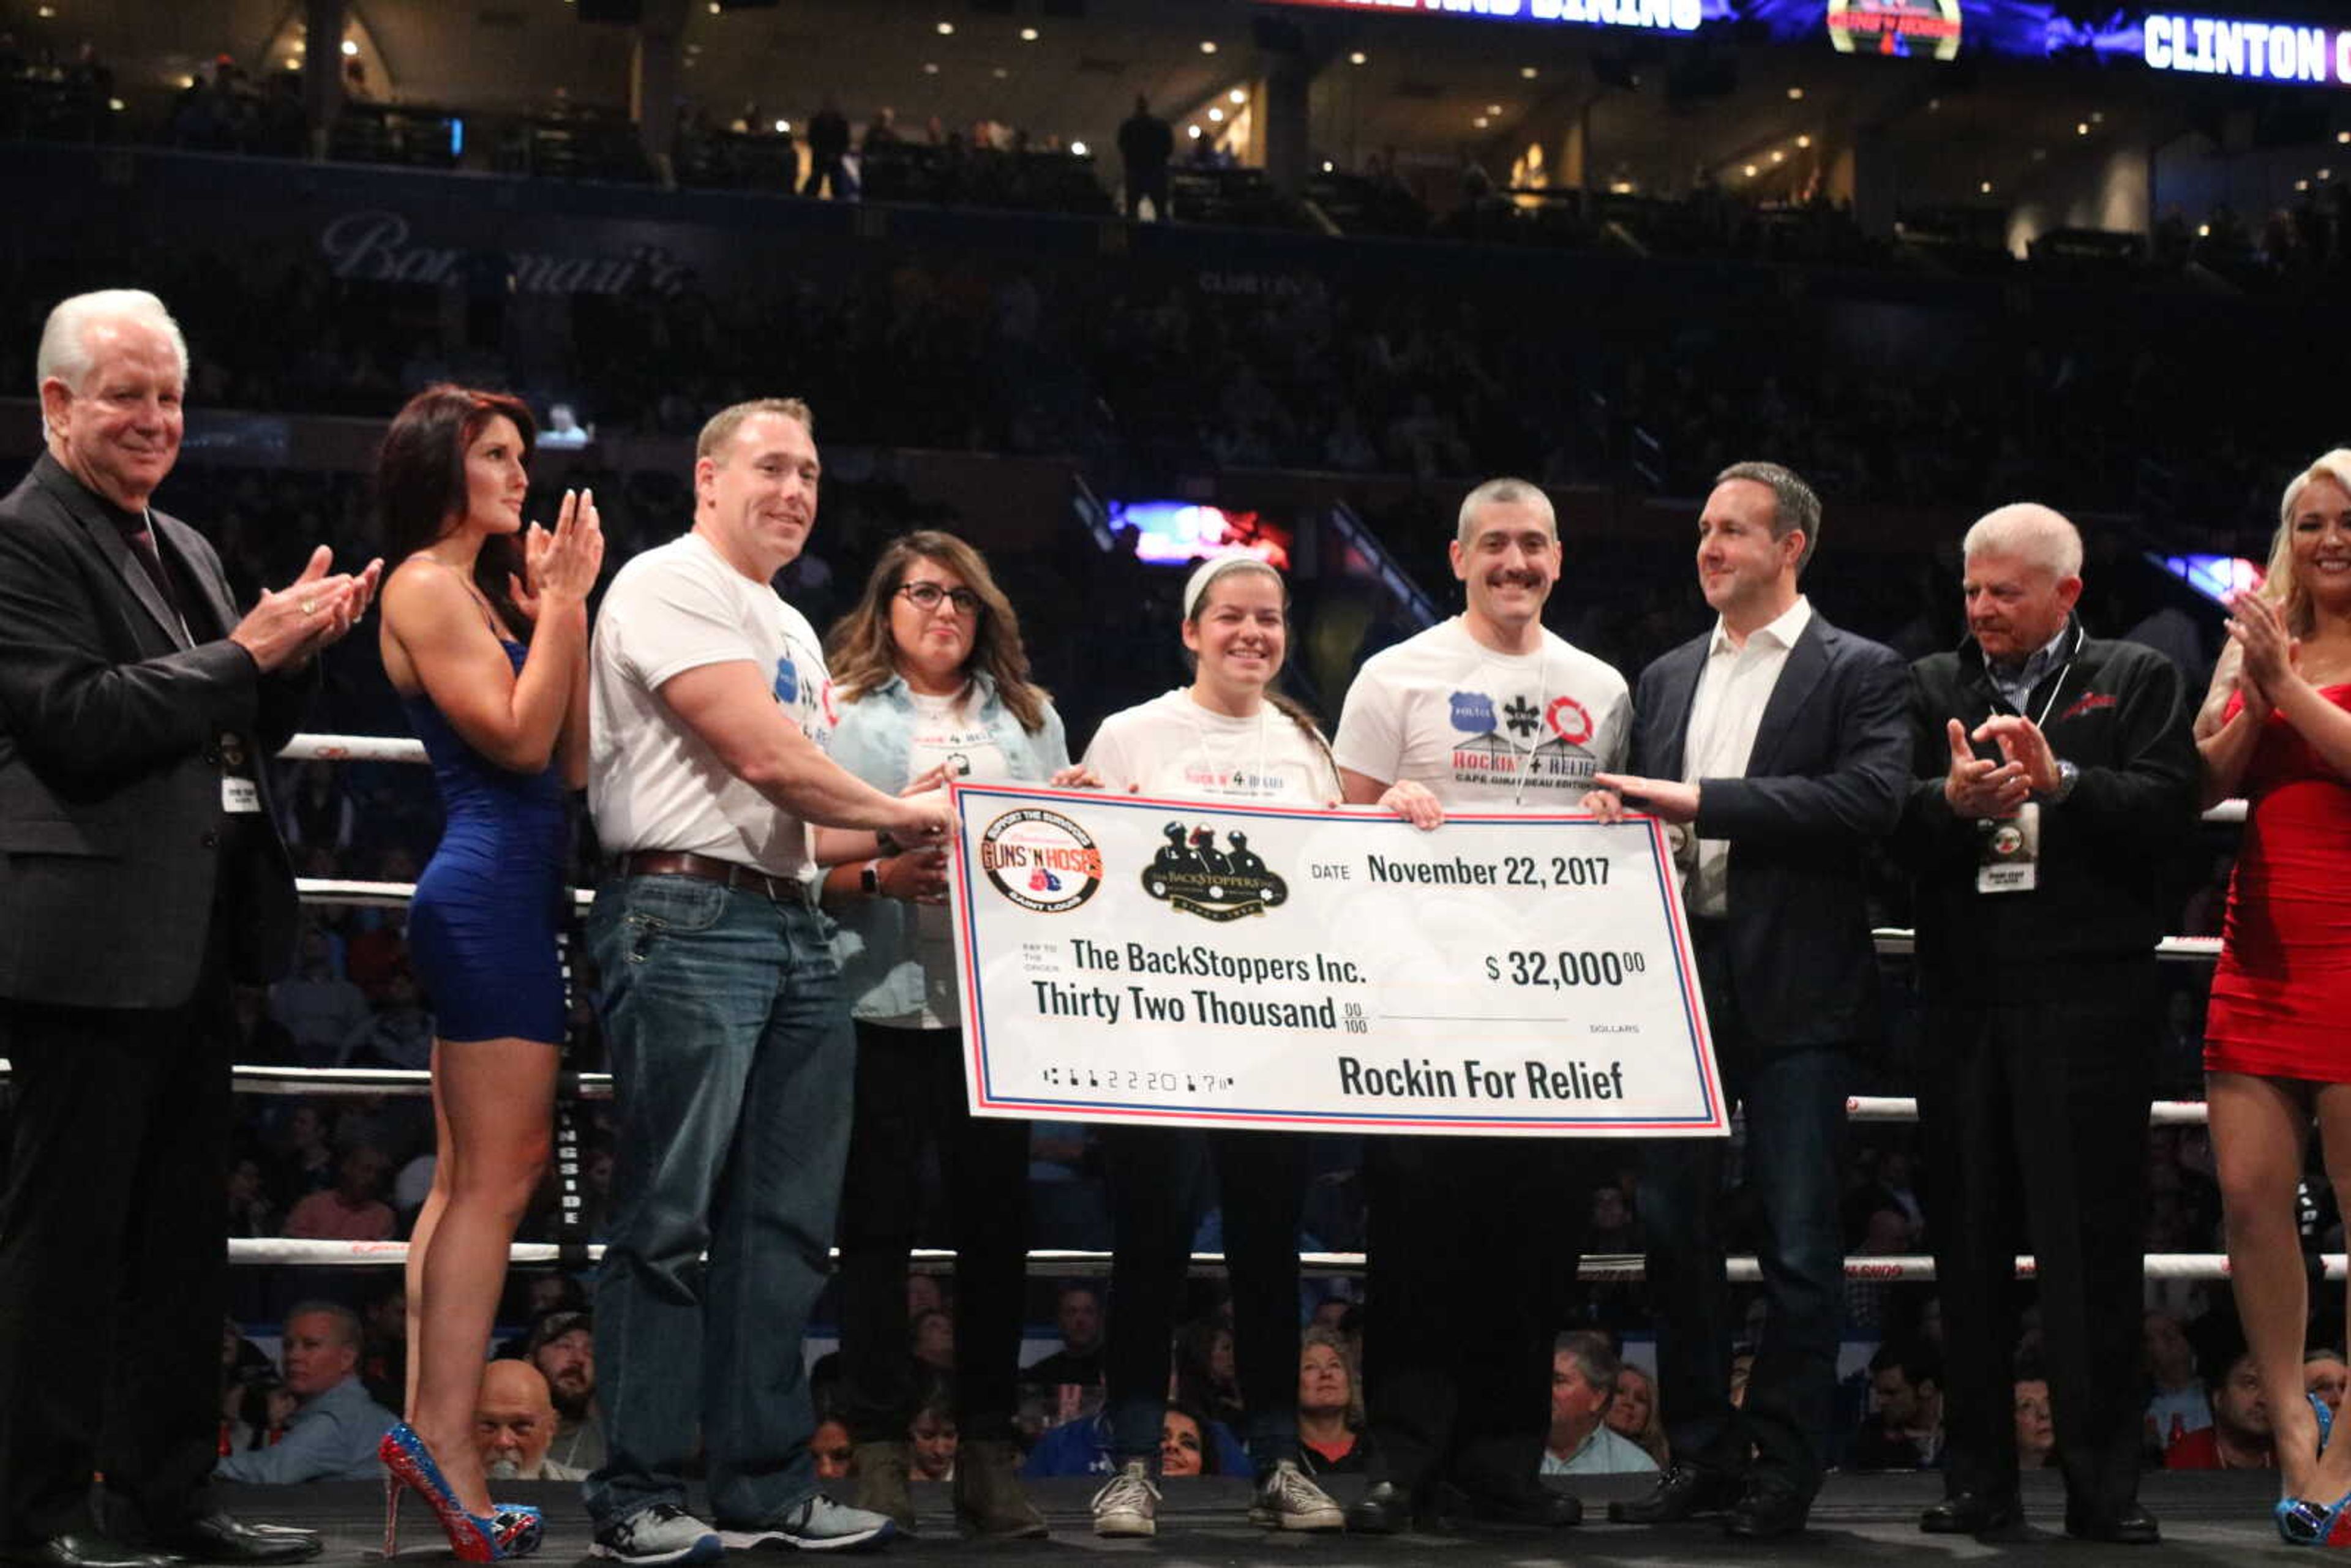 Jennifer Rubin (center) donates $32,000 to BackStoppers at St. Louis Guns ‘N Hoses in Nov. 2017. The money donated was money raised from Rockin’ 4 Relief events.